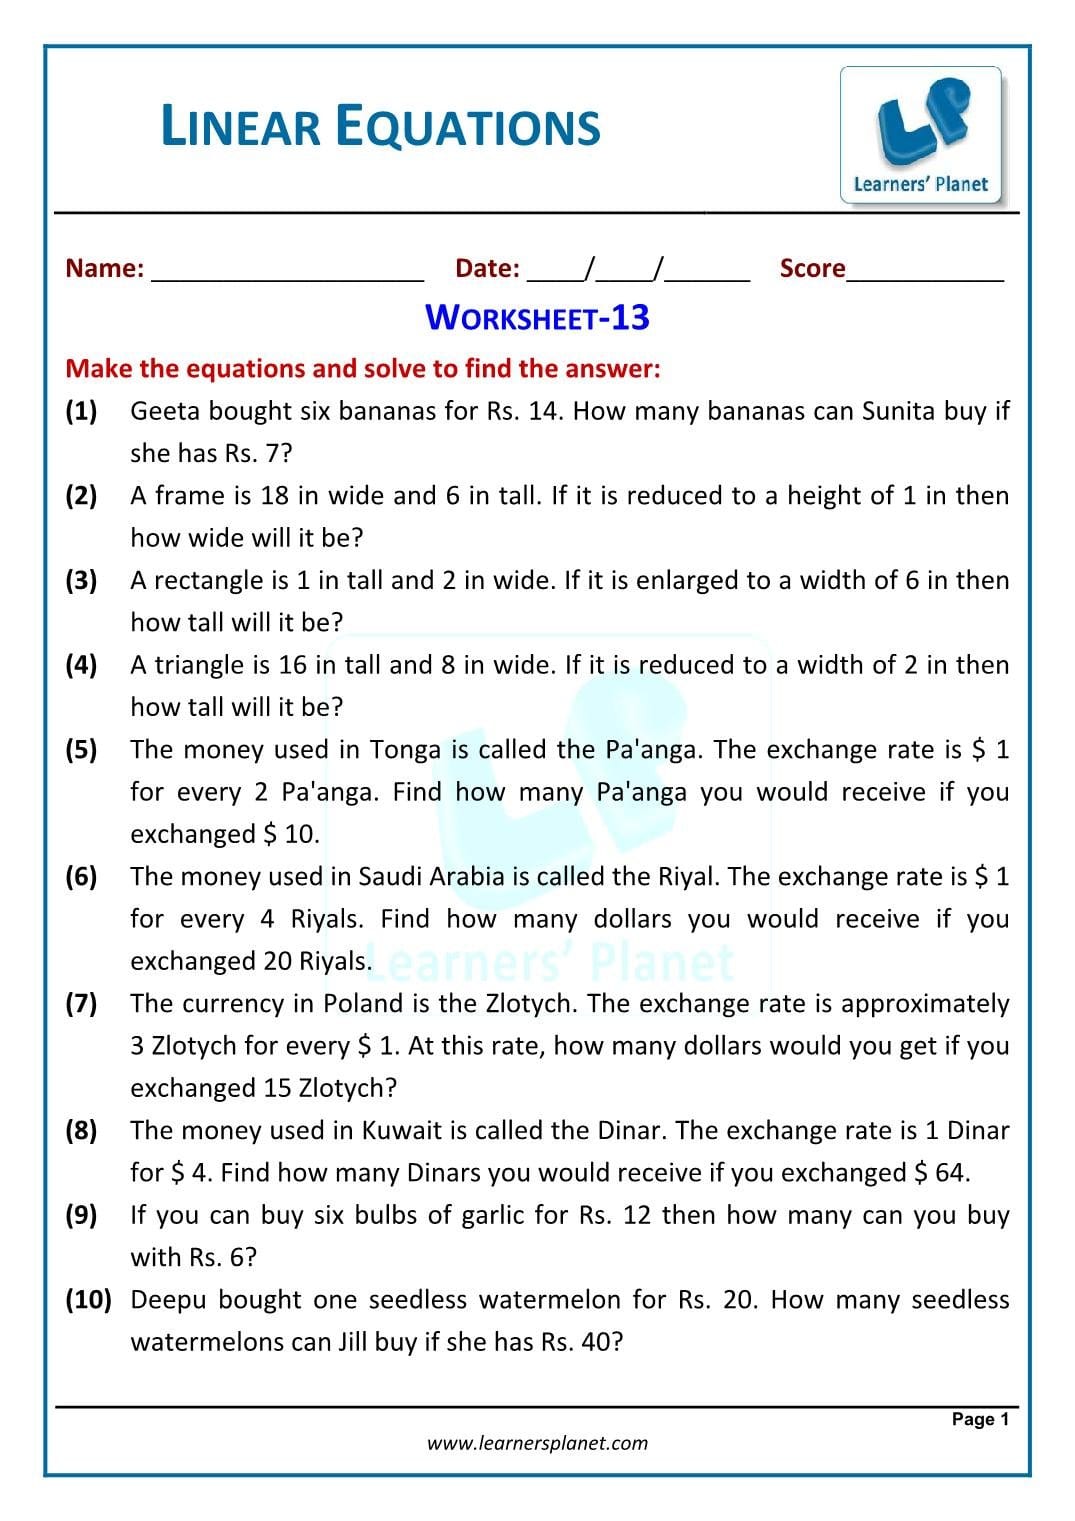 Worksheet For Linear Equations In One Variable Class 7 Maths Regarding Linear Equation In One Variable Worksheet